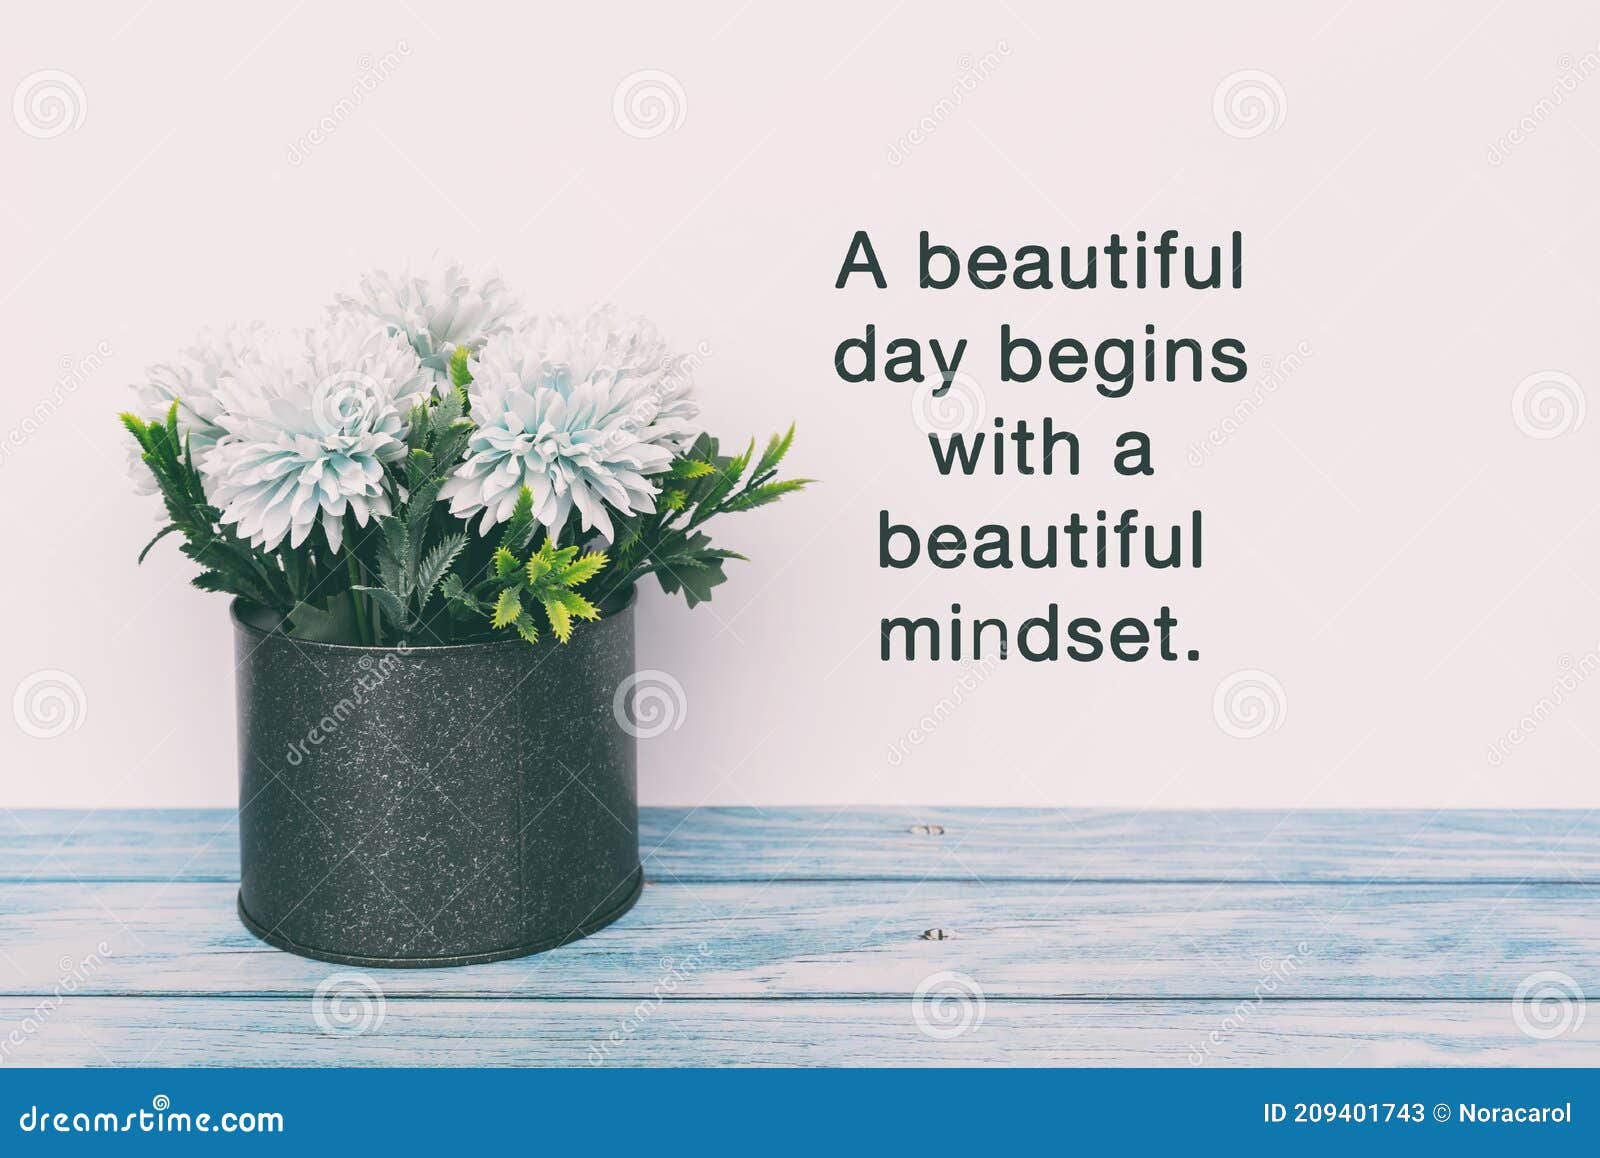 Inspirational Quotes - a Beautiful Day Begins with a Beautiful ...